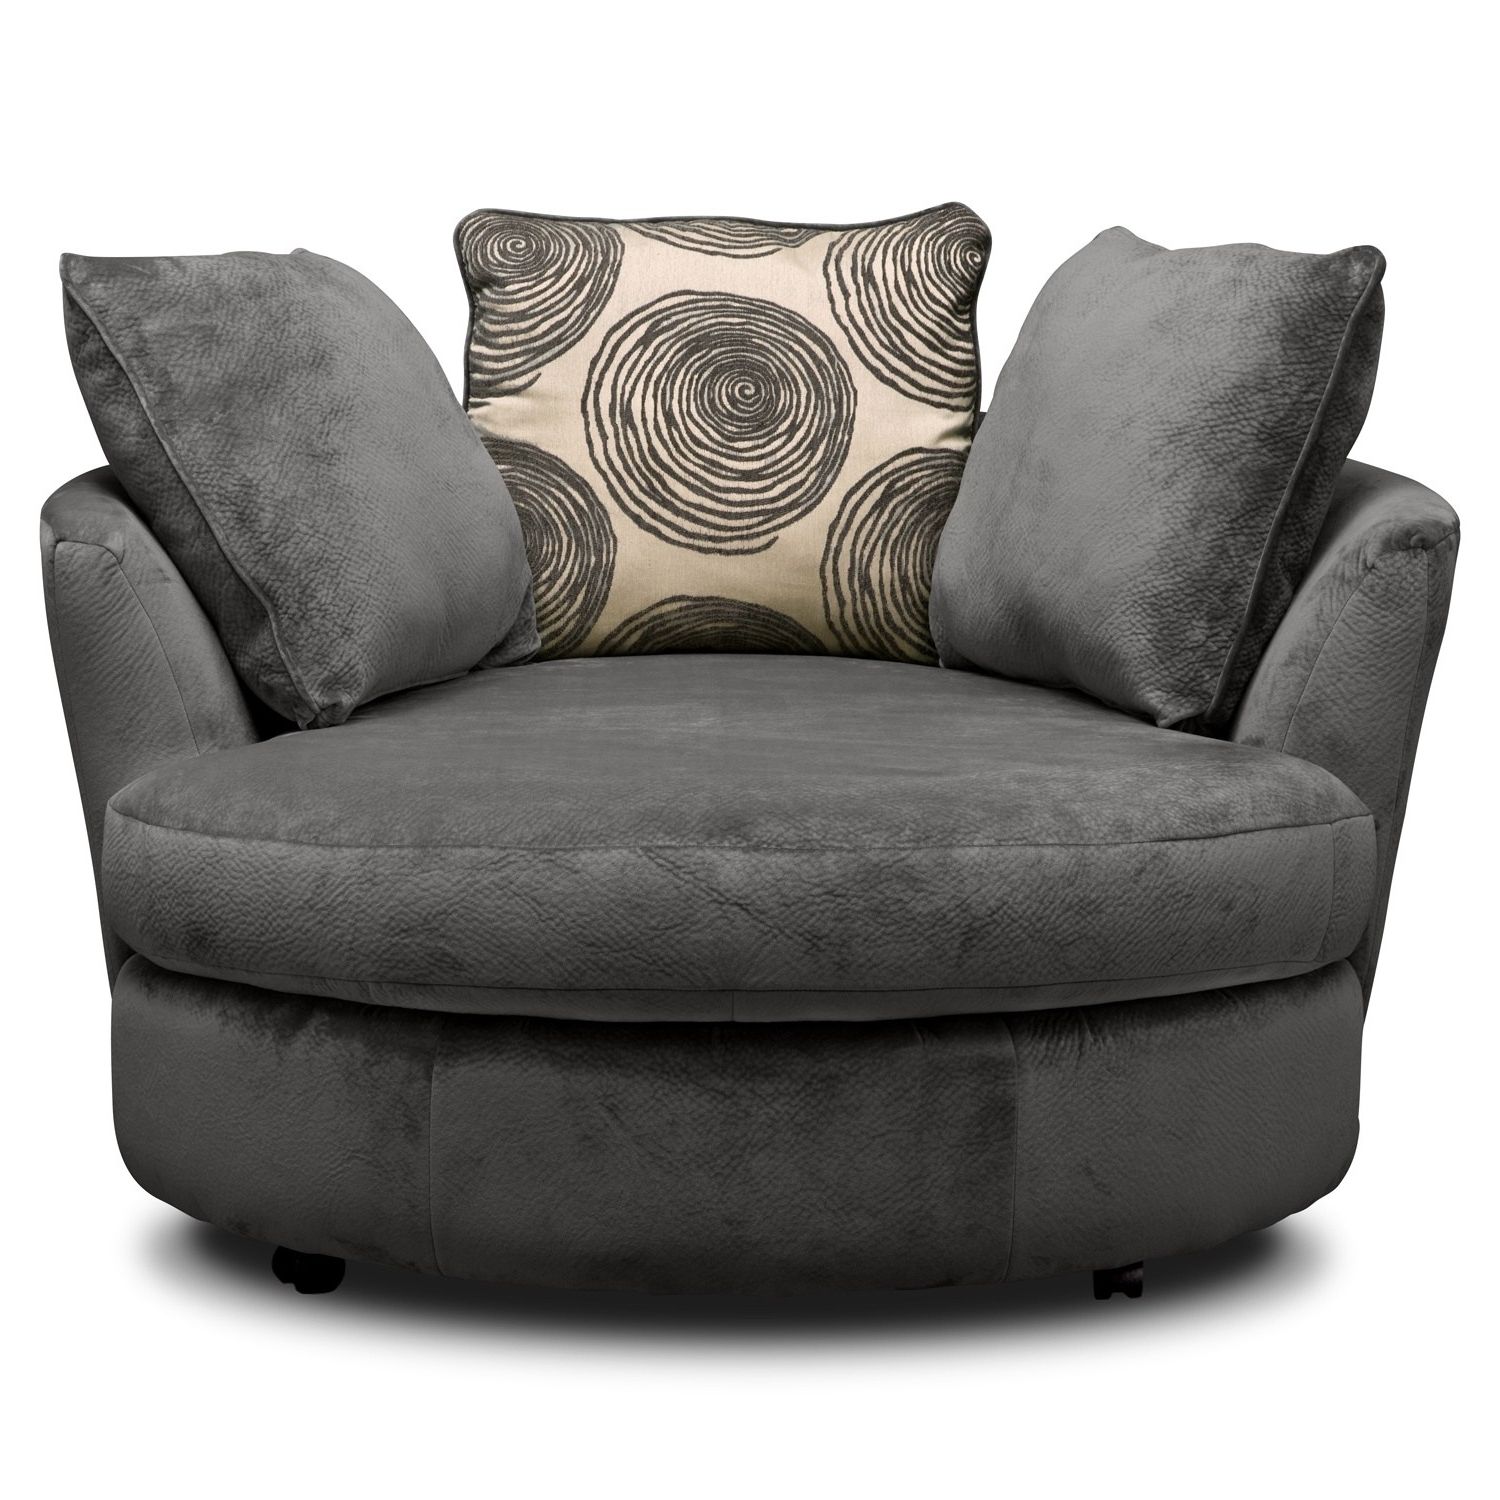 Current Grey Chaise Lounge Chairs With Regard To Grey Chaise Lounge Chair • Lounge Chairs Ideas (View 15 of 15)